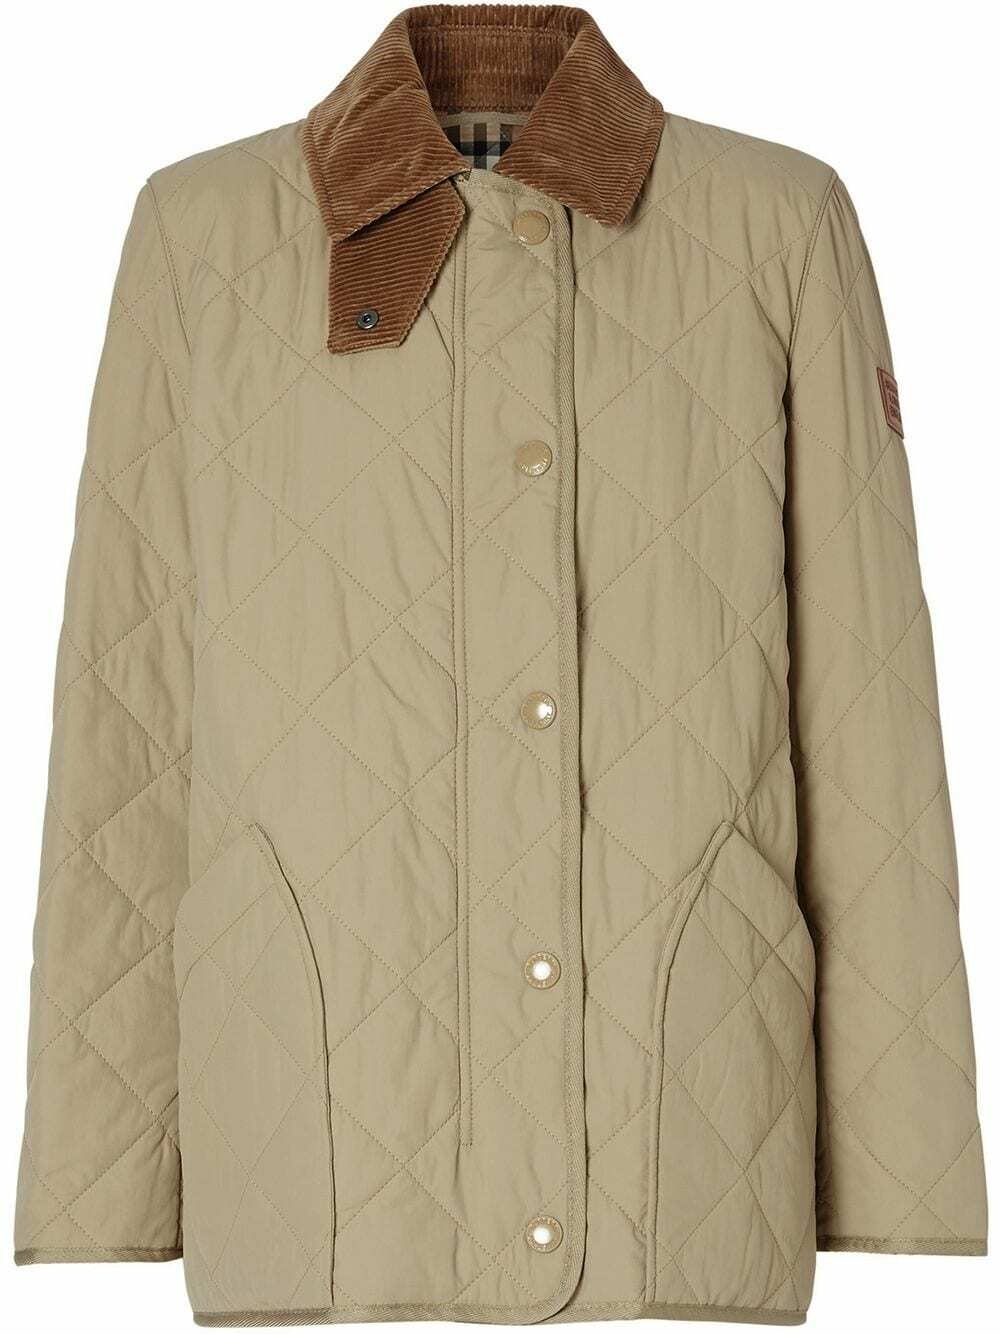 Photo: BURBERRY - Nylon Quilted Jacket